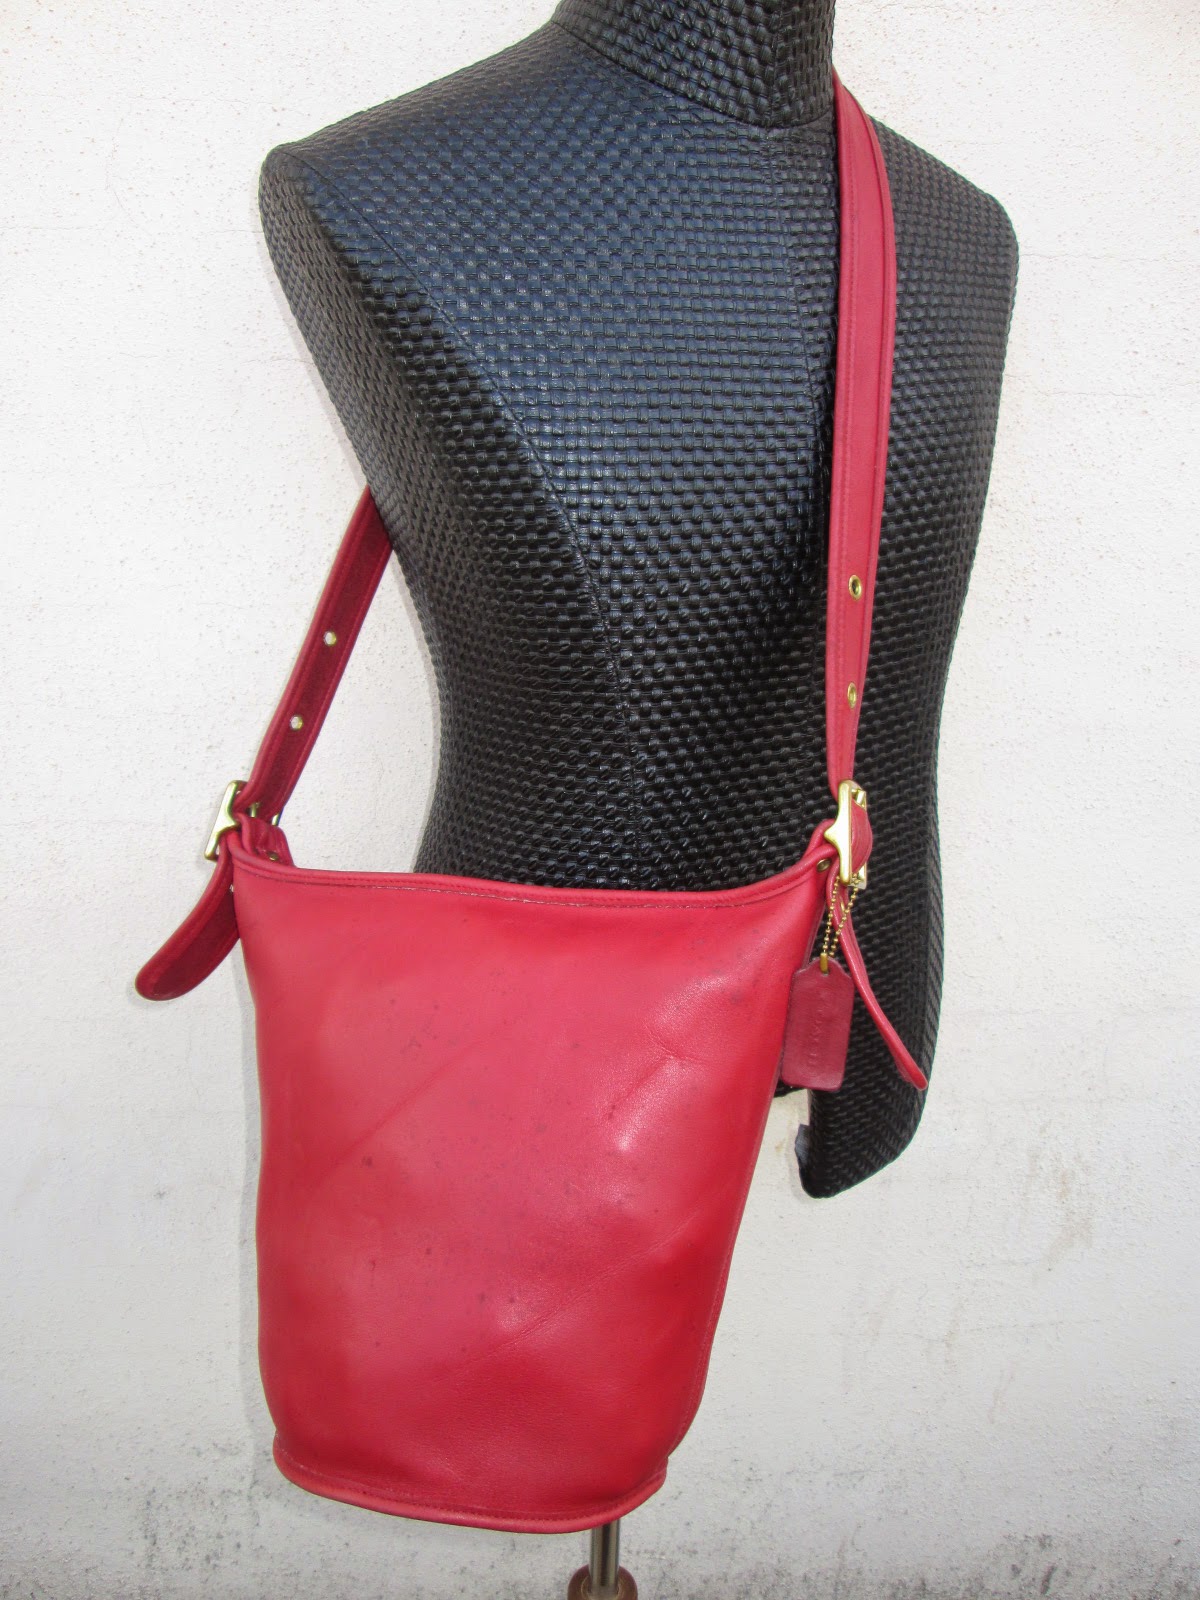 d0rayakEEbaG: Authentic Coach Red Leather Shoulder/Sling Bag(SOLD)